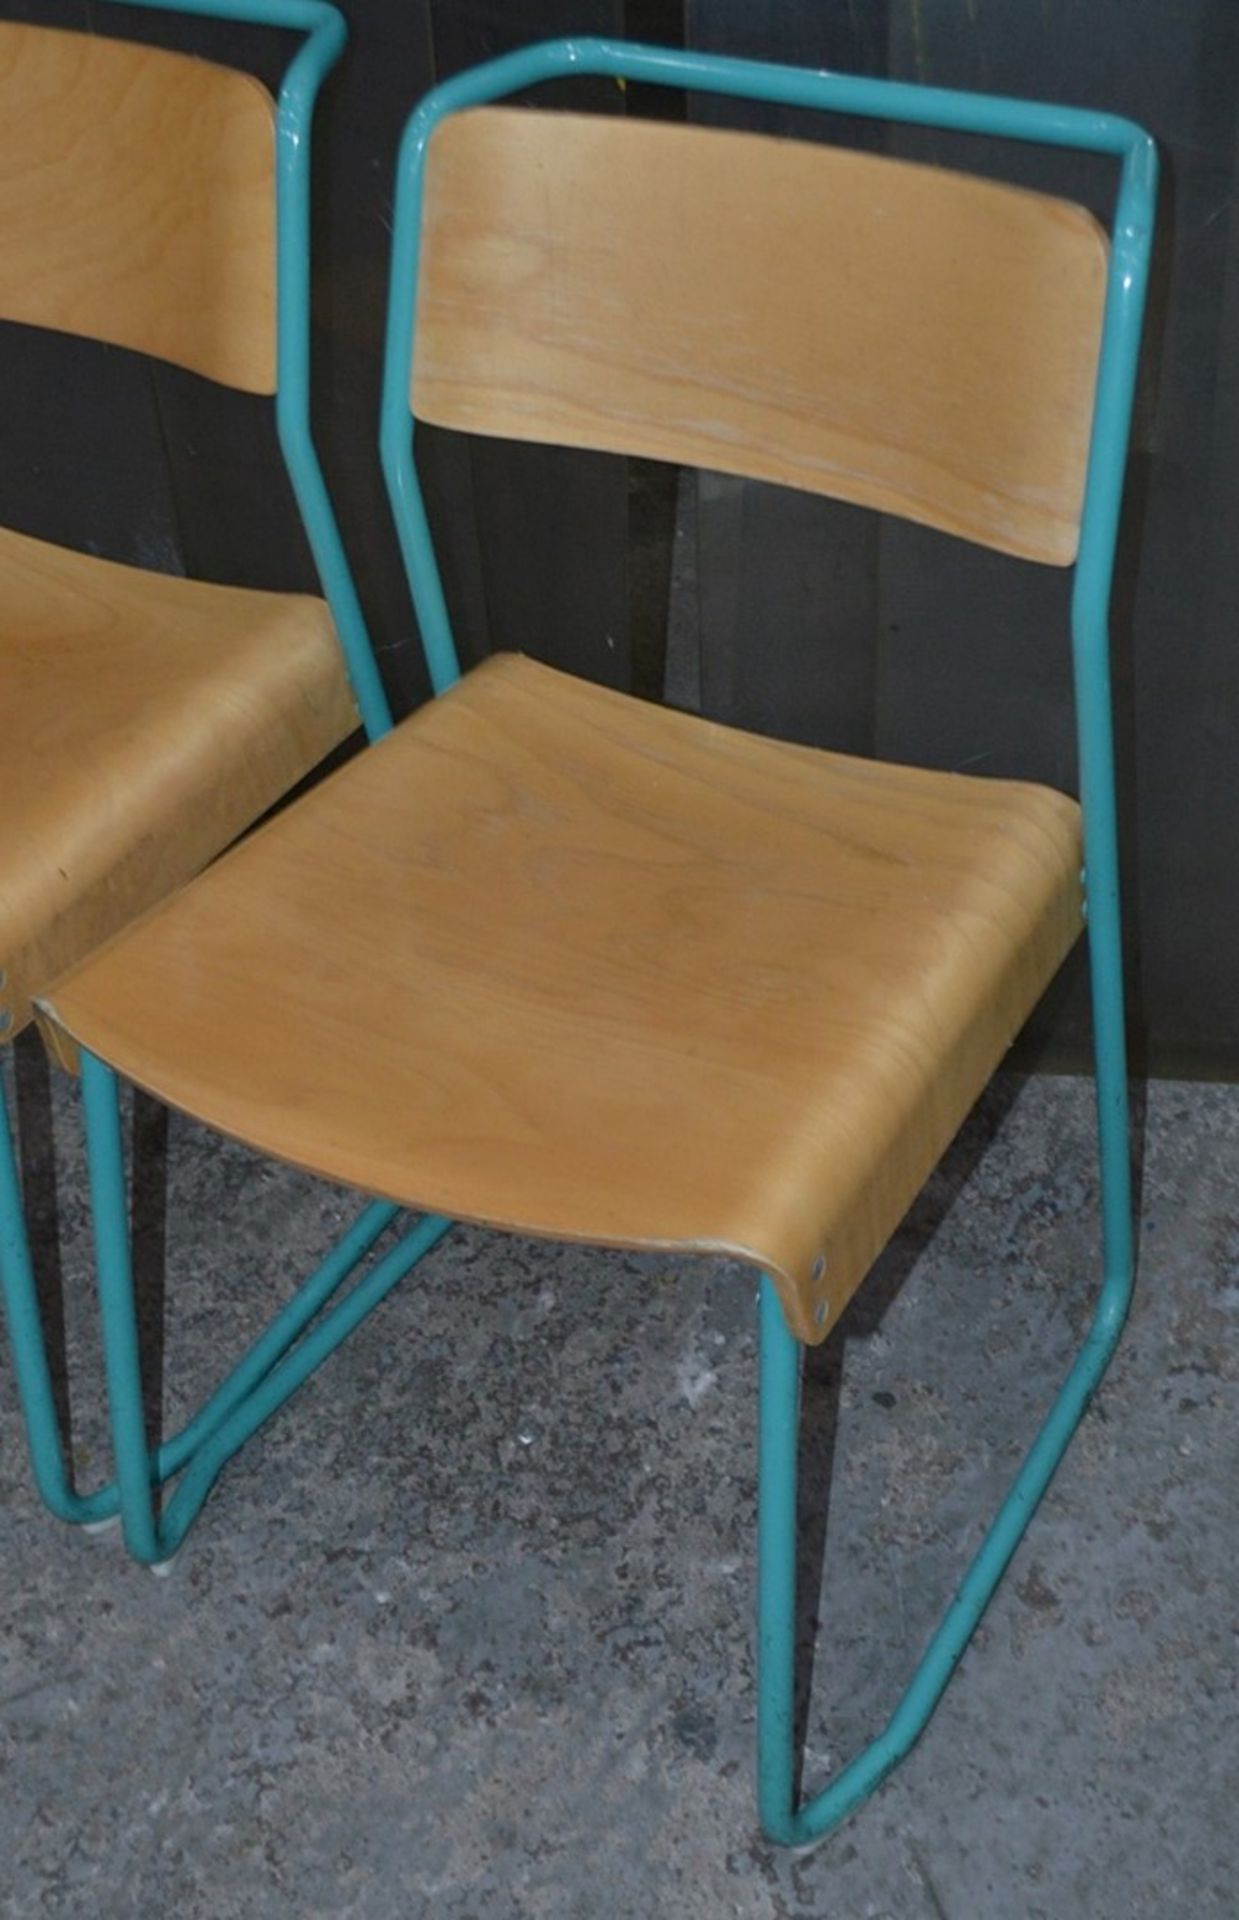 12 x Contemporary Stackable Bistro / Bar Chairs With Metal Frames In Teal With Curved Vanished - Image 4 of 11